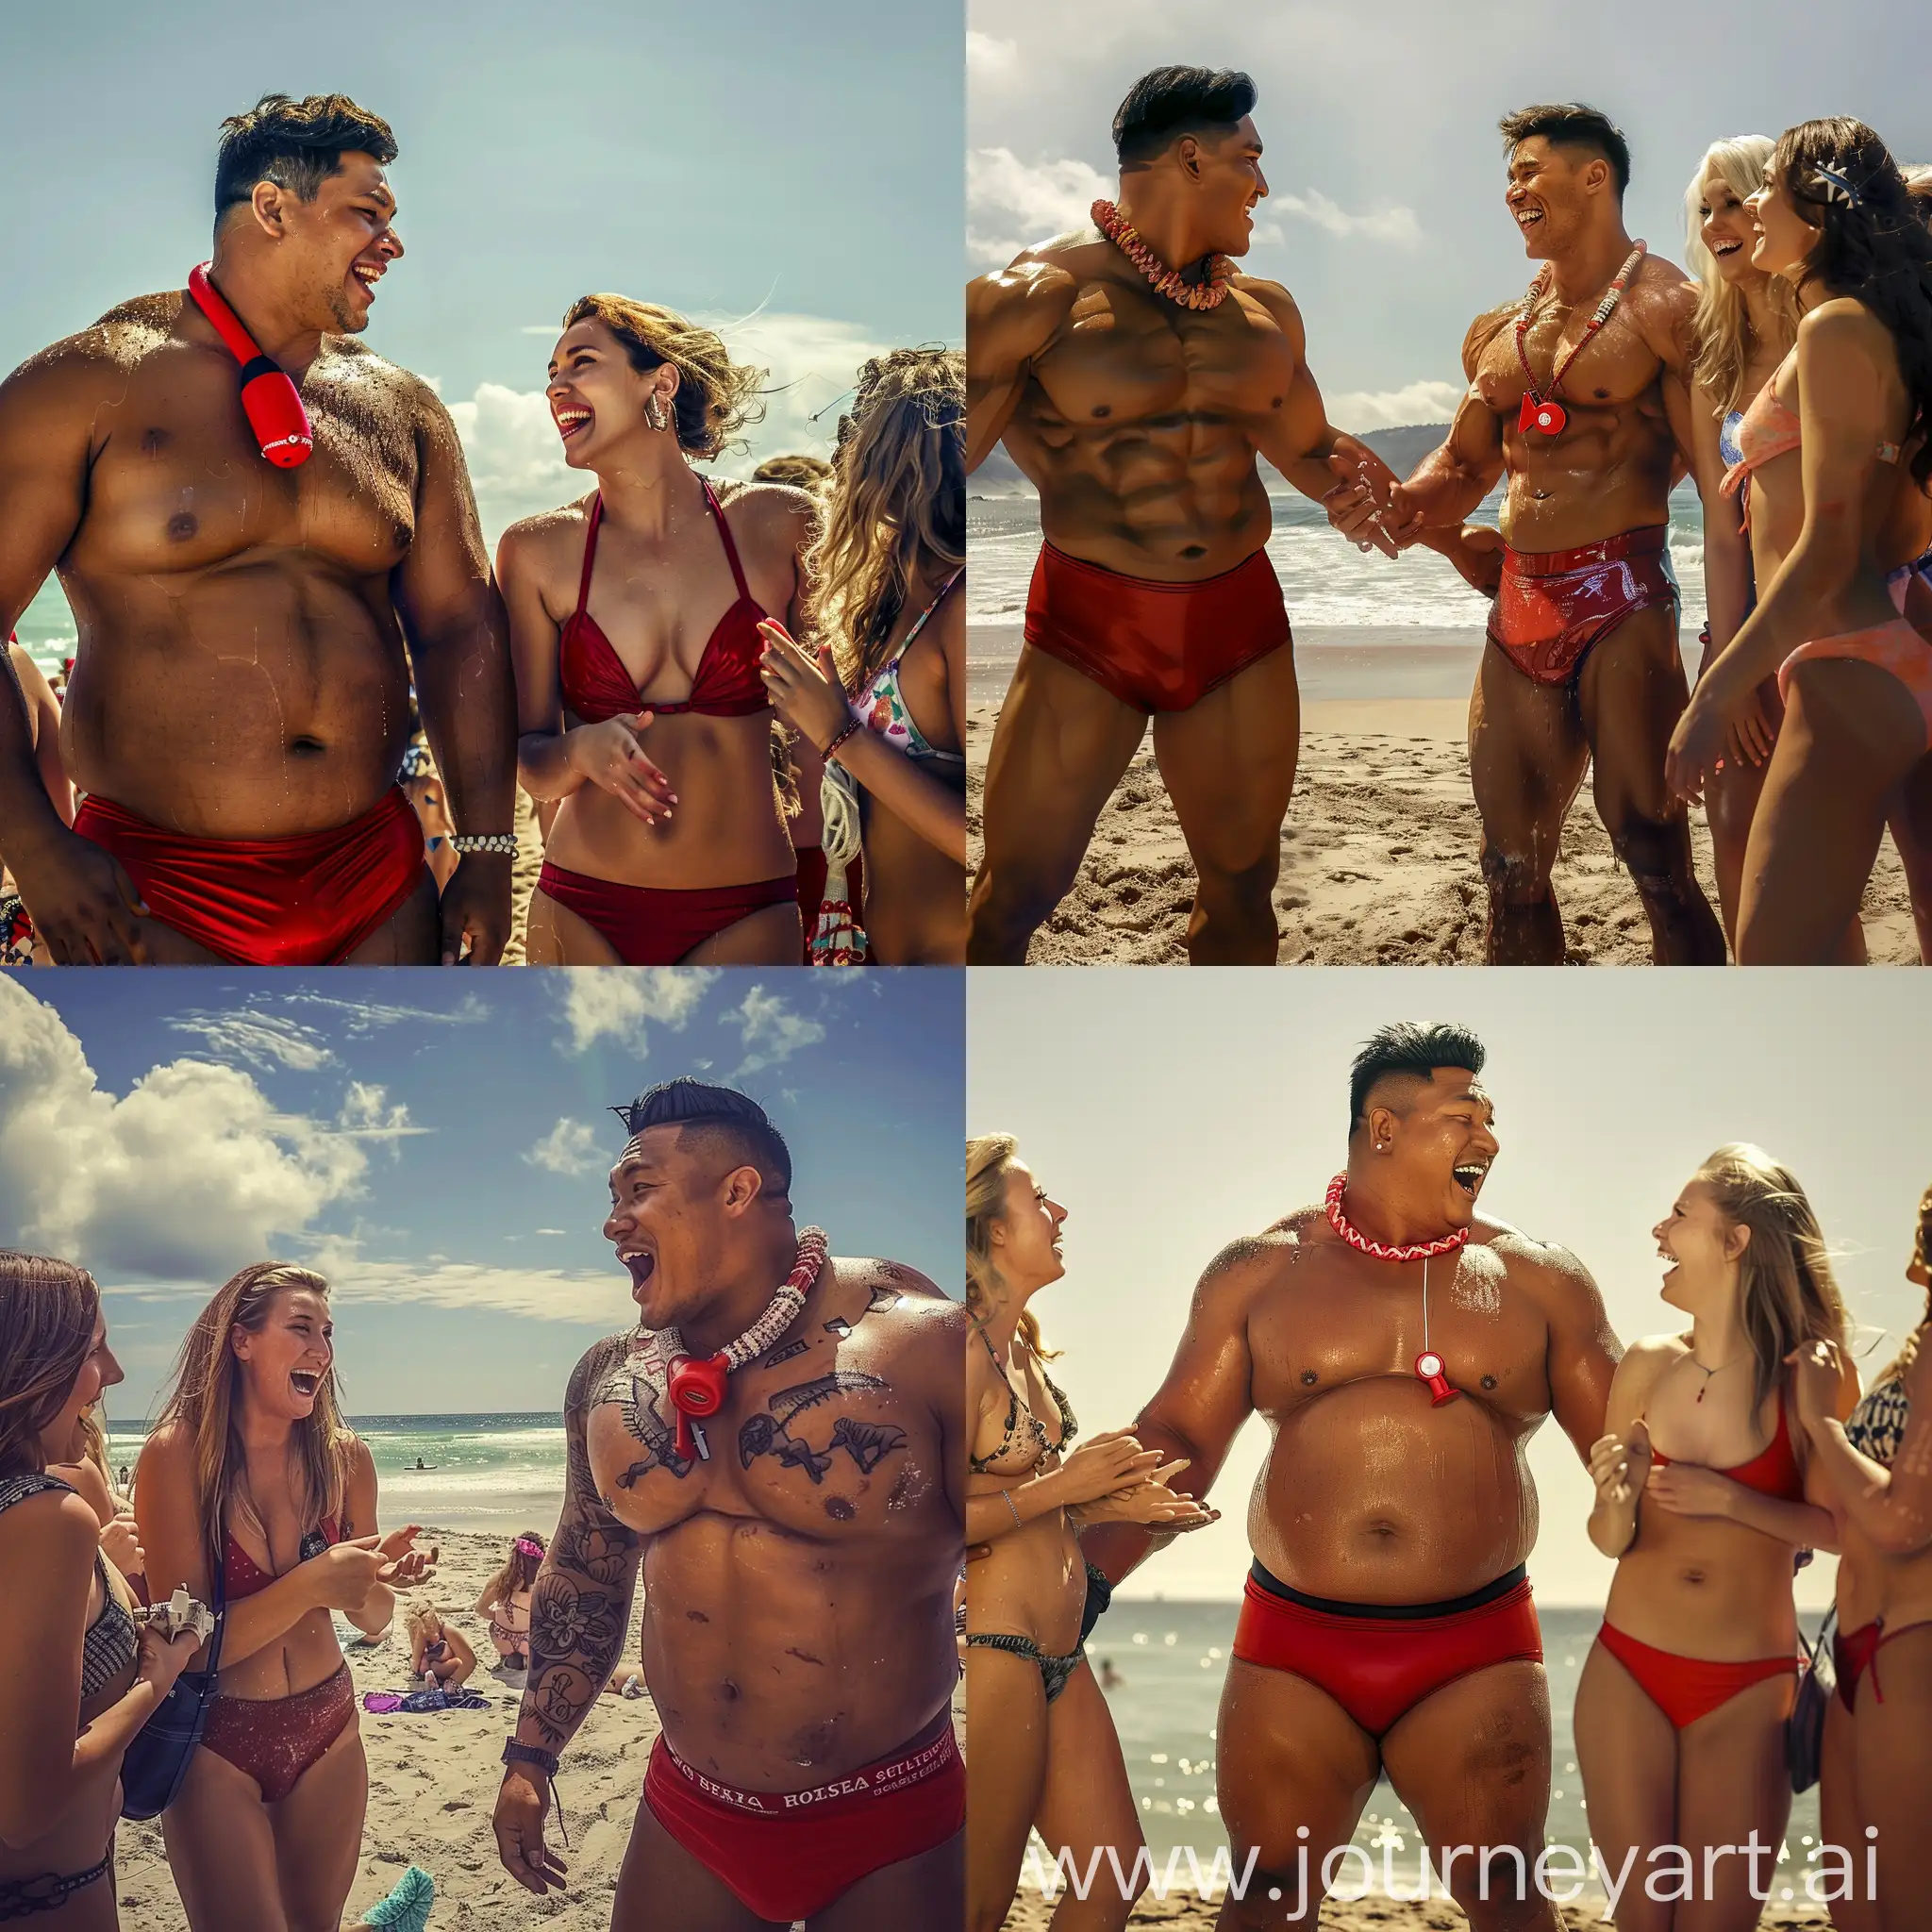 Handsome-Latino-Lifeguard-Chatting-with-Happy-Beachgoers-on-Sunny-Day